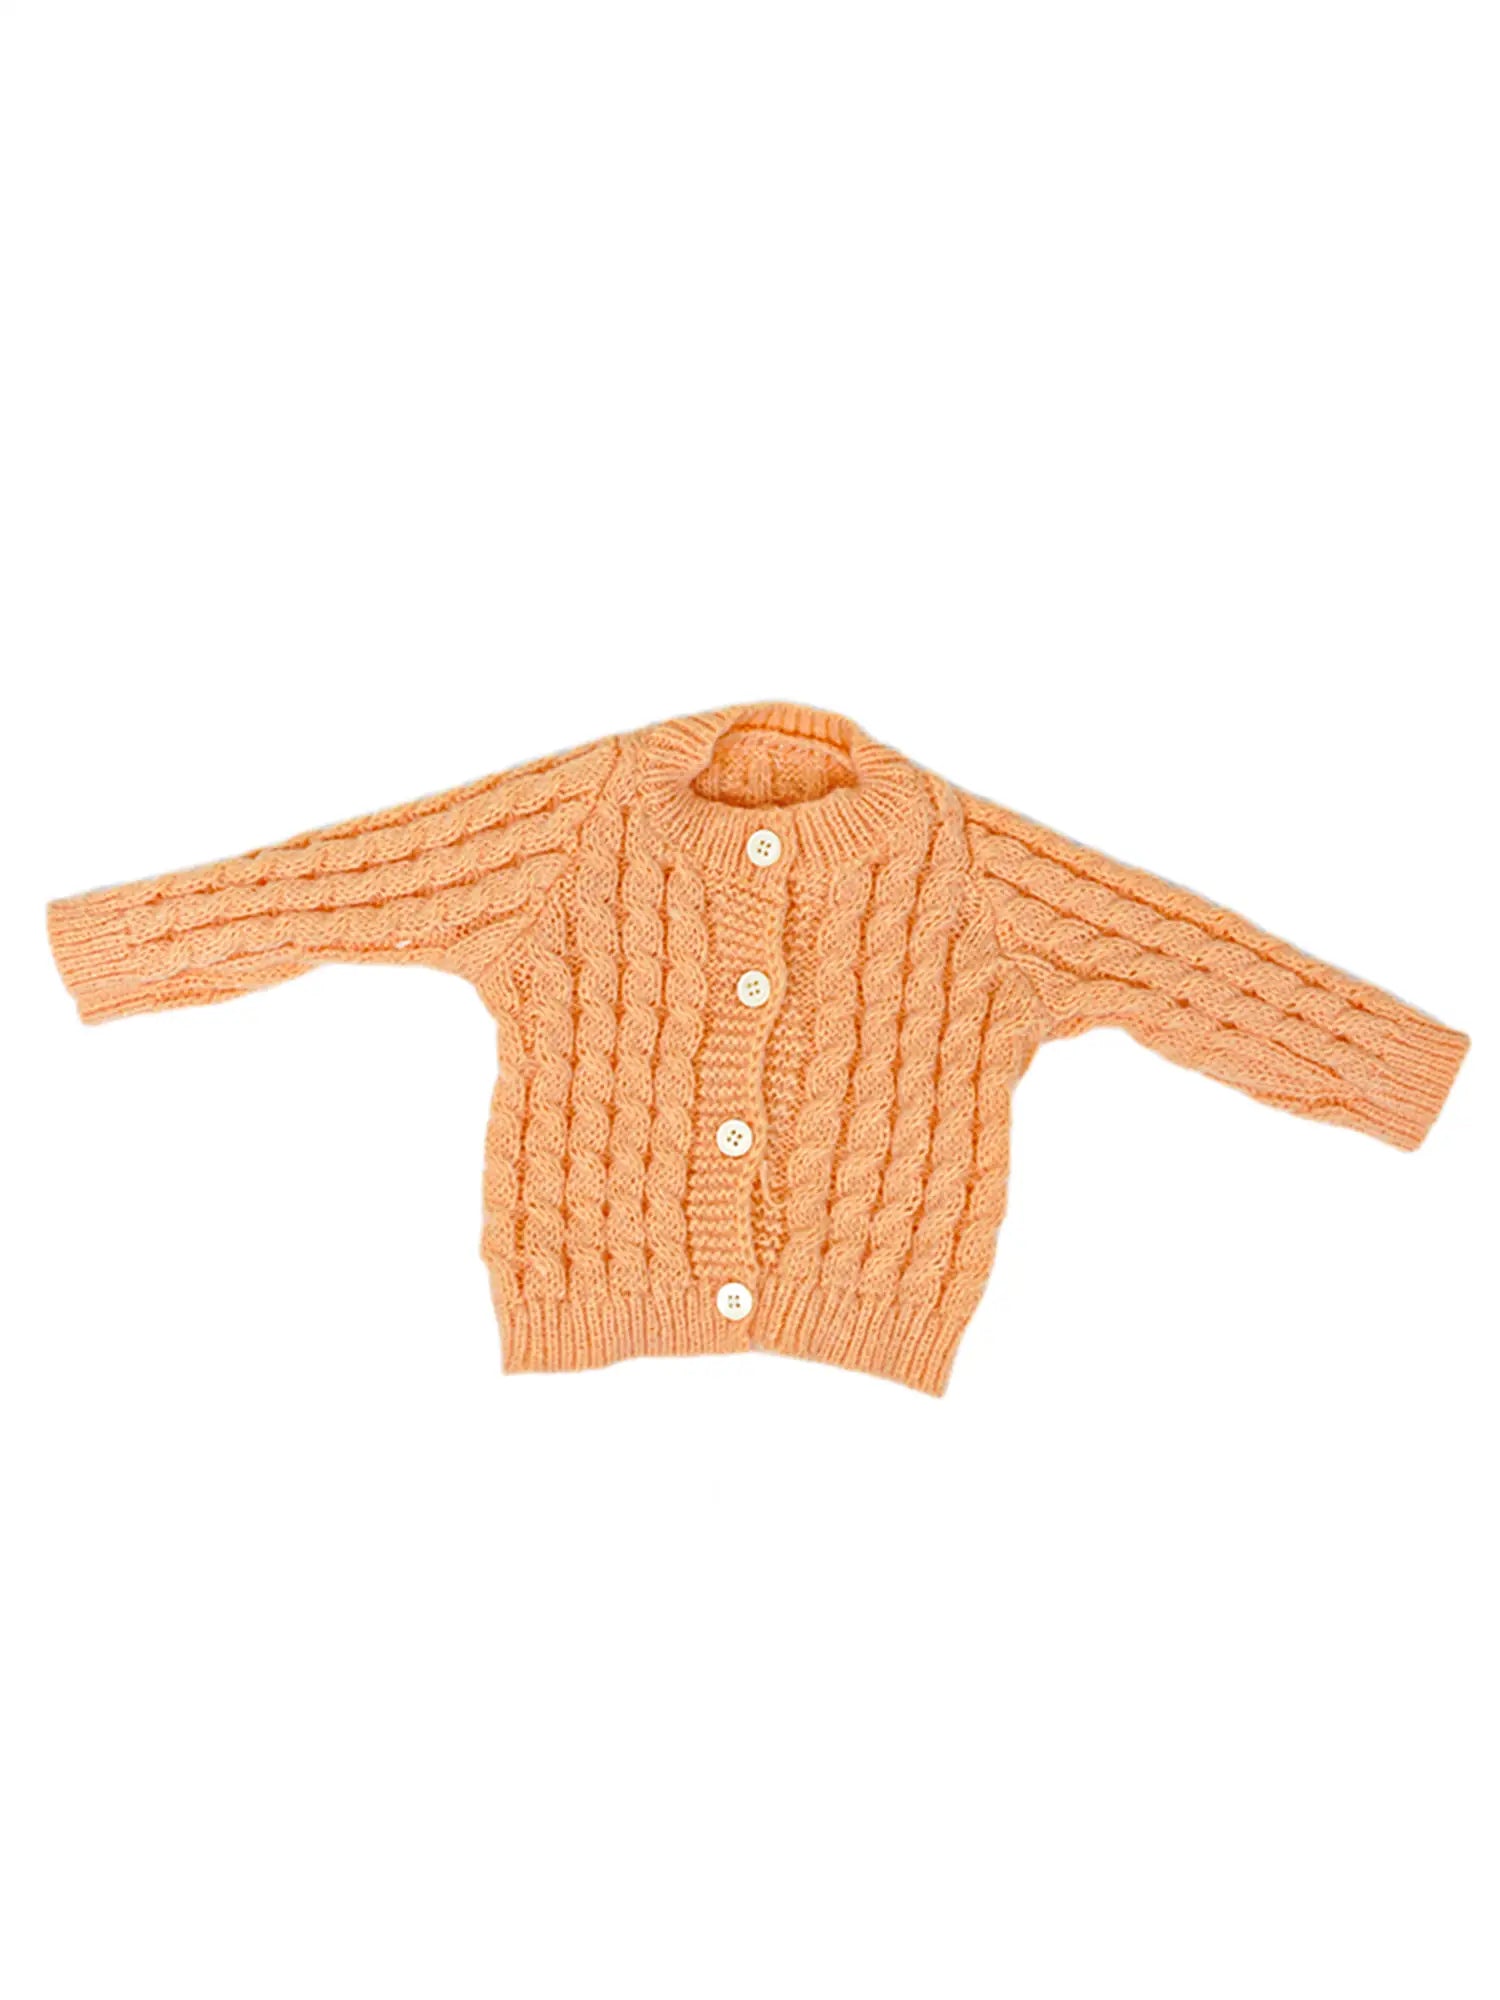 Crochet College Style Doll Clothing